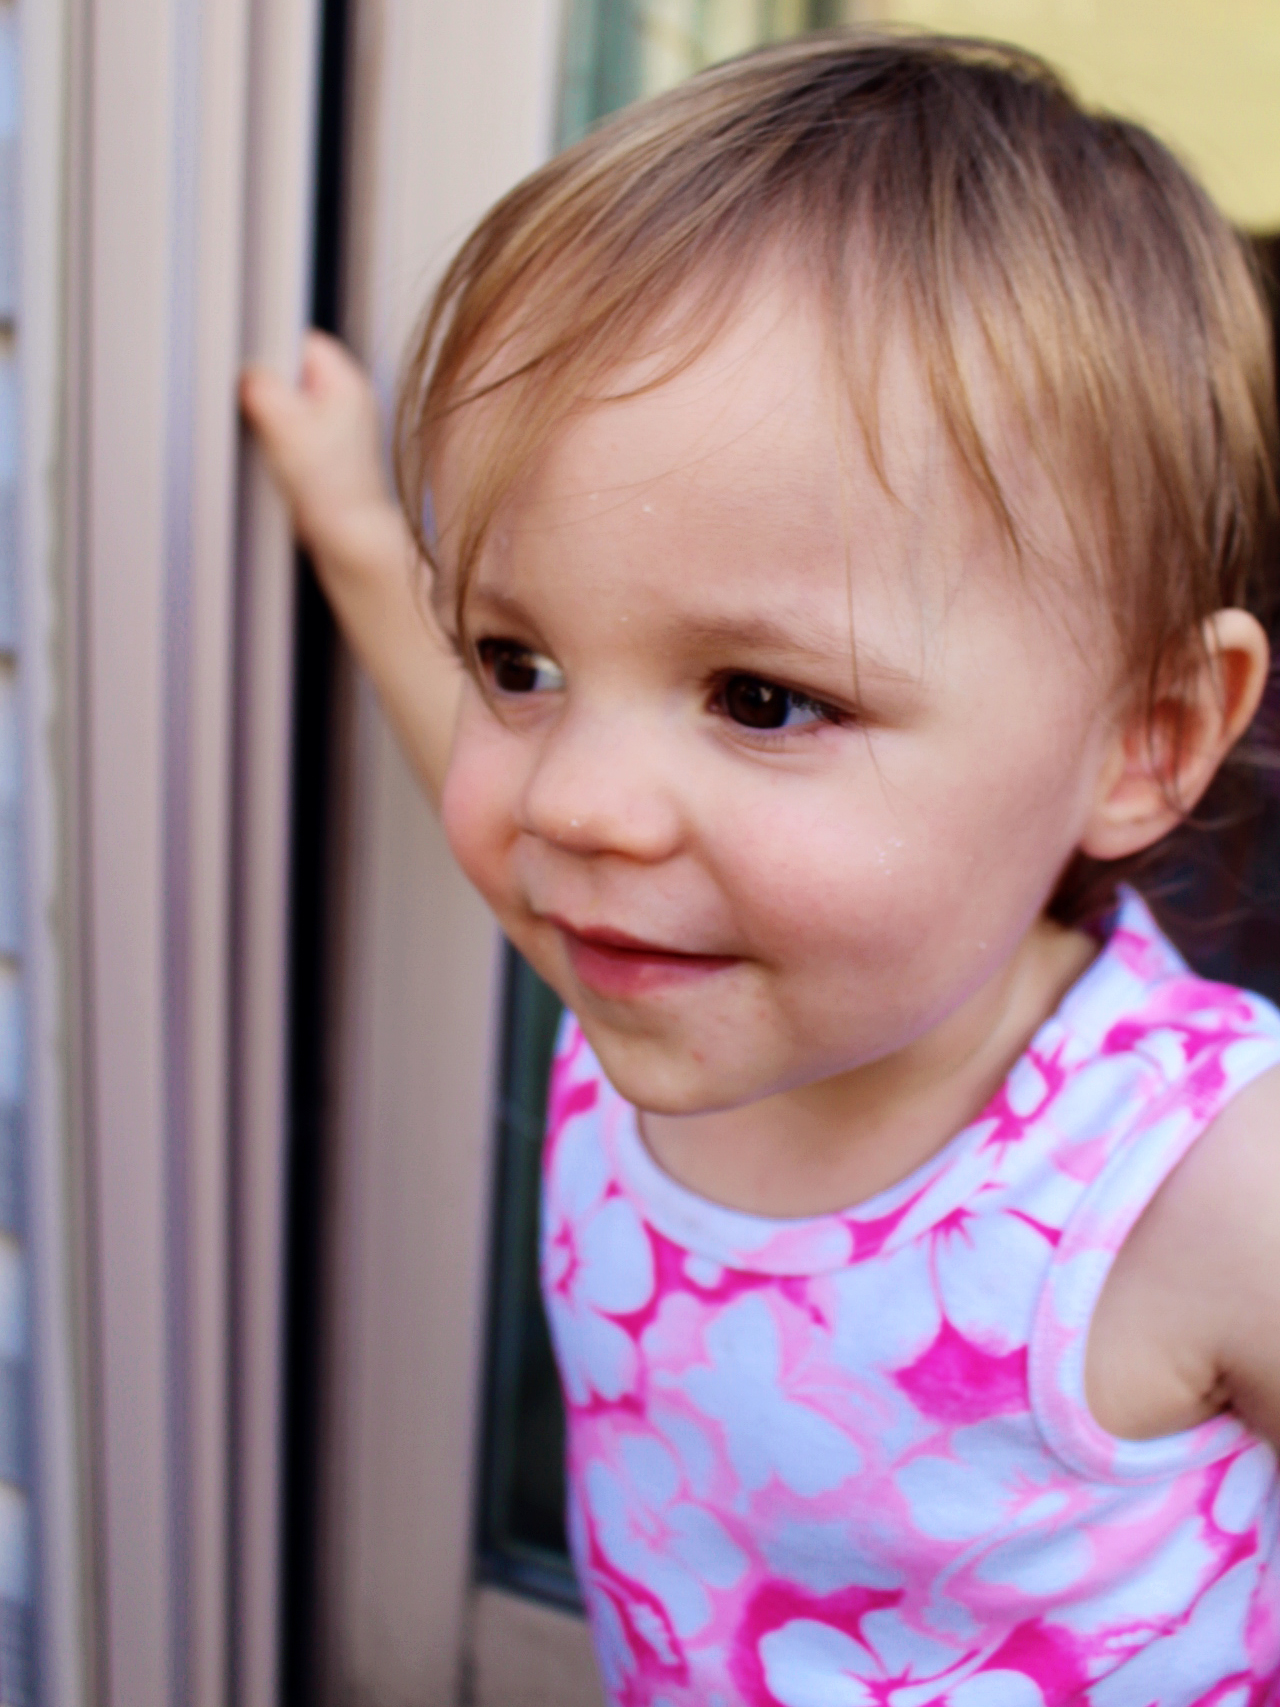 a young child with pink and white shirt on staring at camera